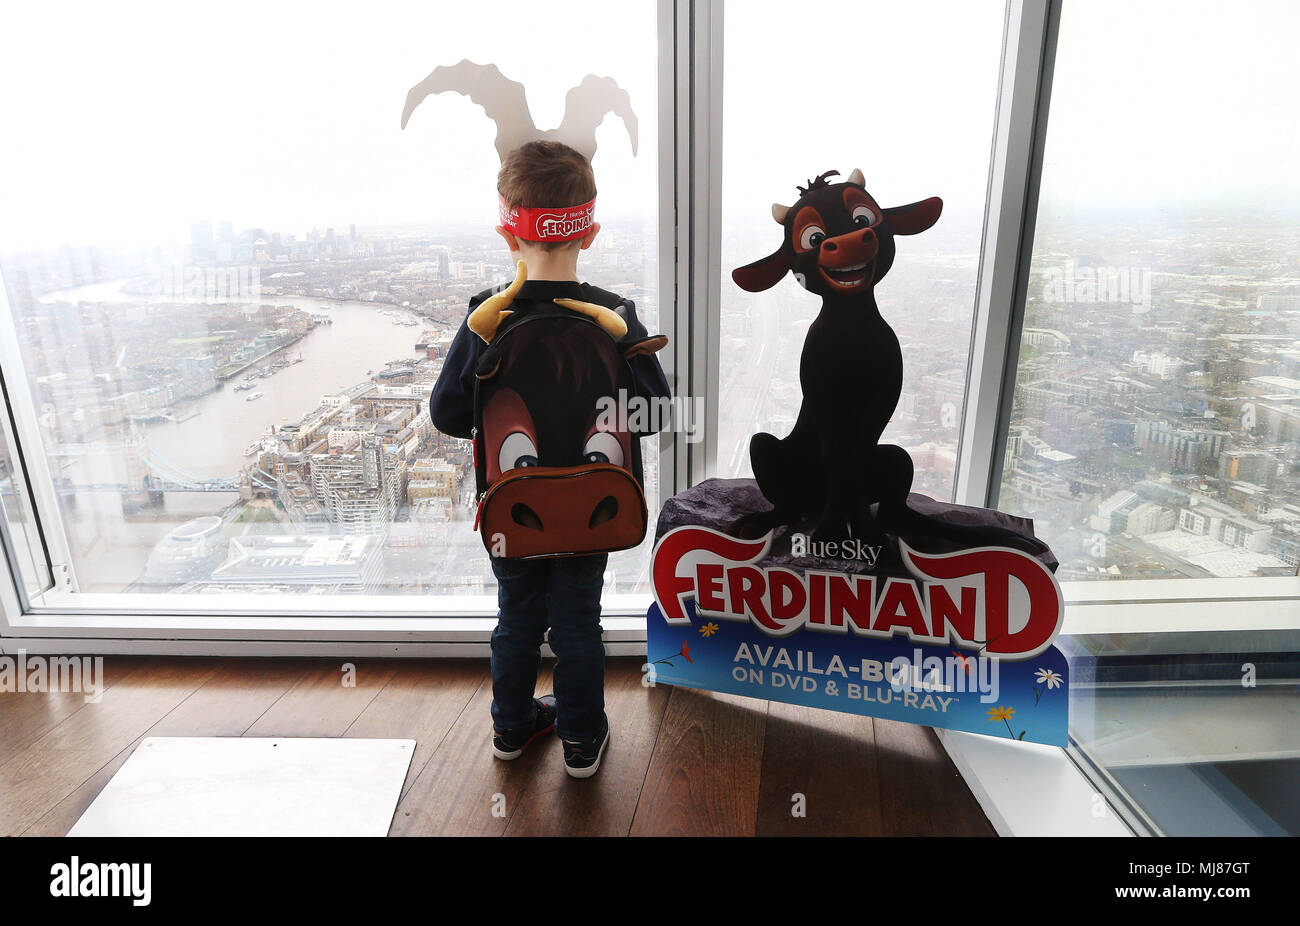 Ferdinand DVD launch event at The Shard Blu-ray and DVD release of Ferdinand  - out April 16 - Where: London, United Kingdom When: 03 Apr 2018 Credit:  Joe Pepler/PinPep/WENN.com Stock Photo - Alamy